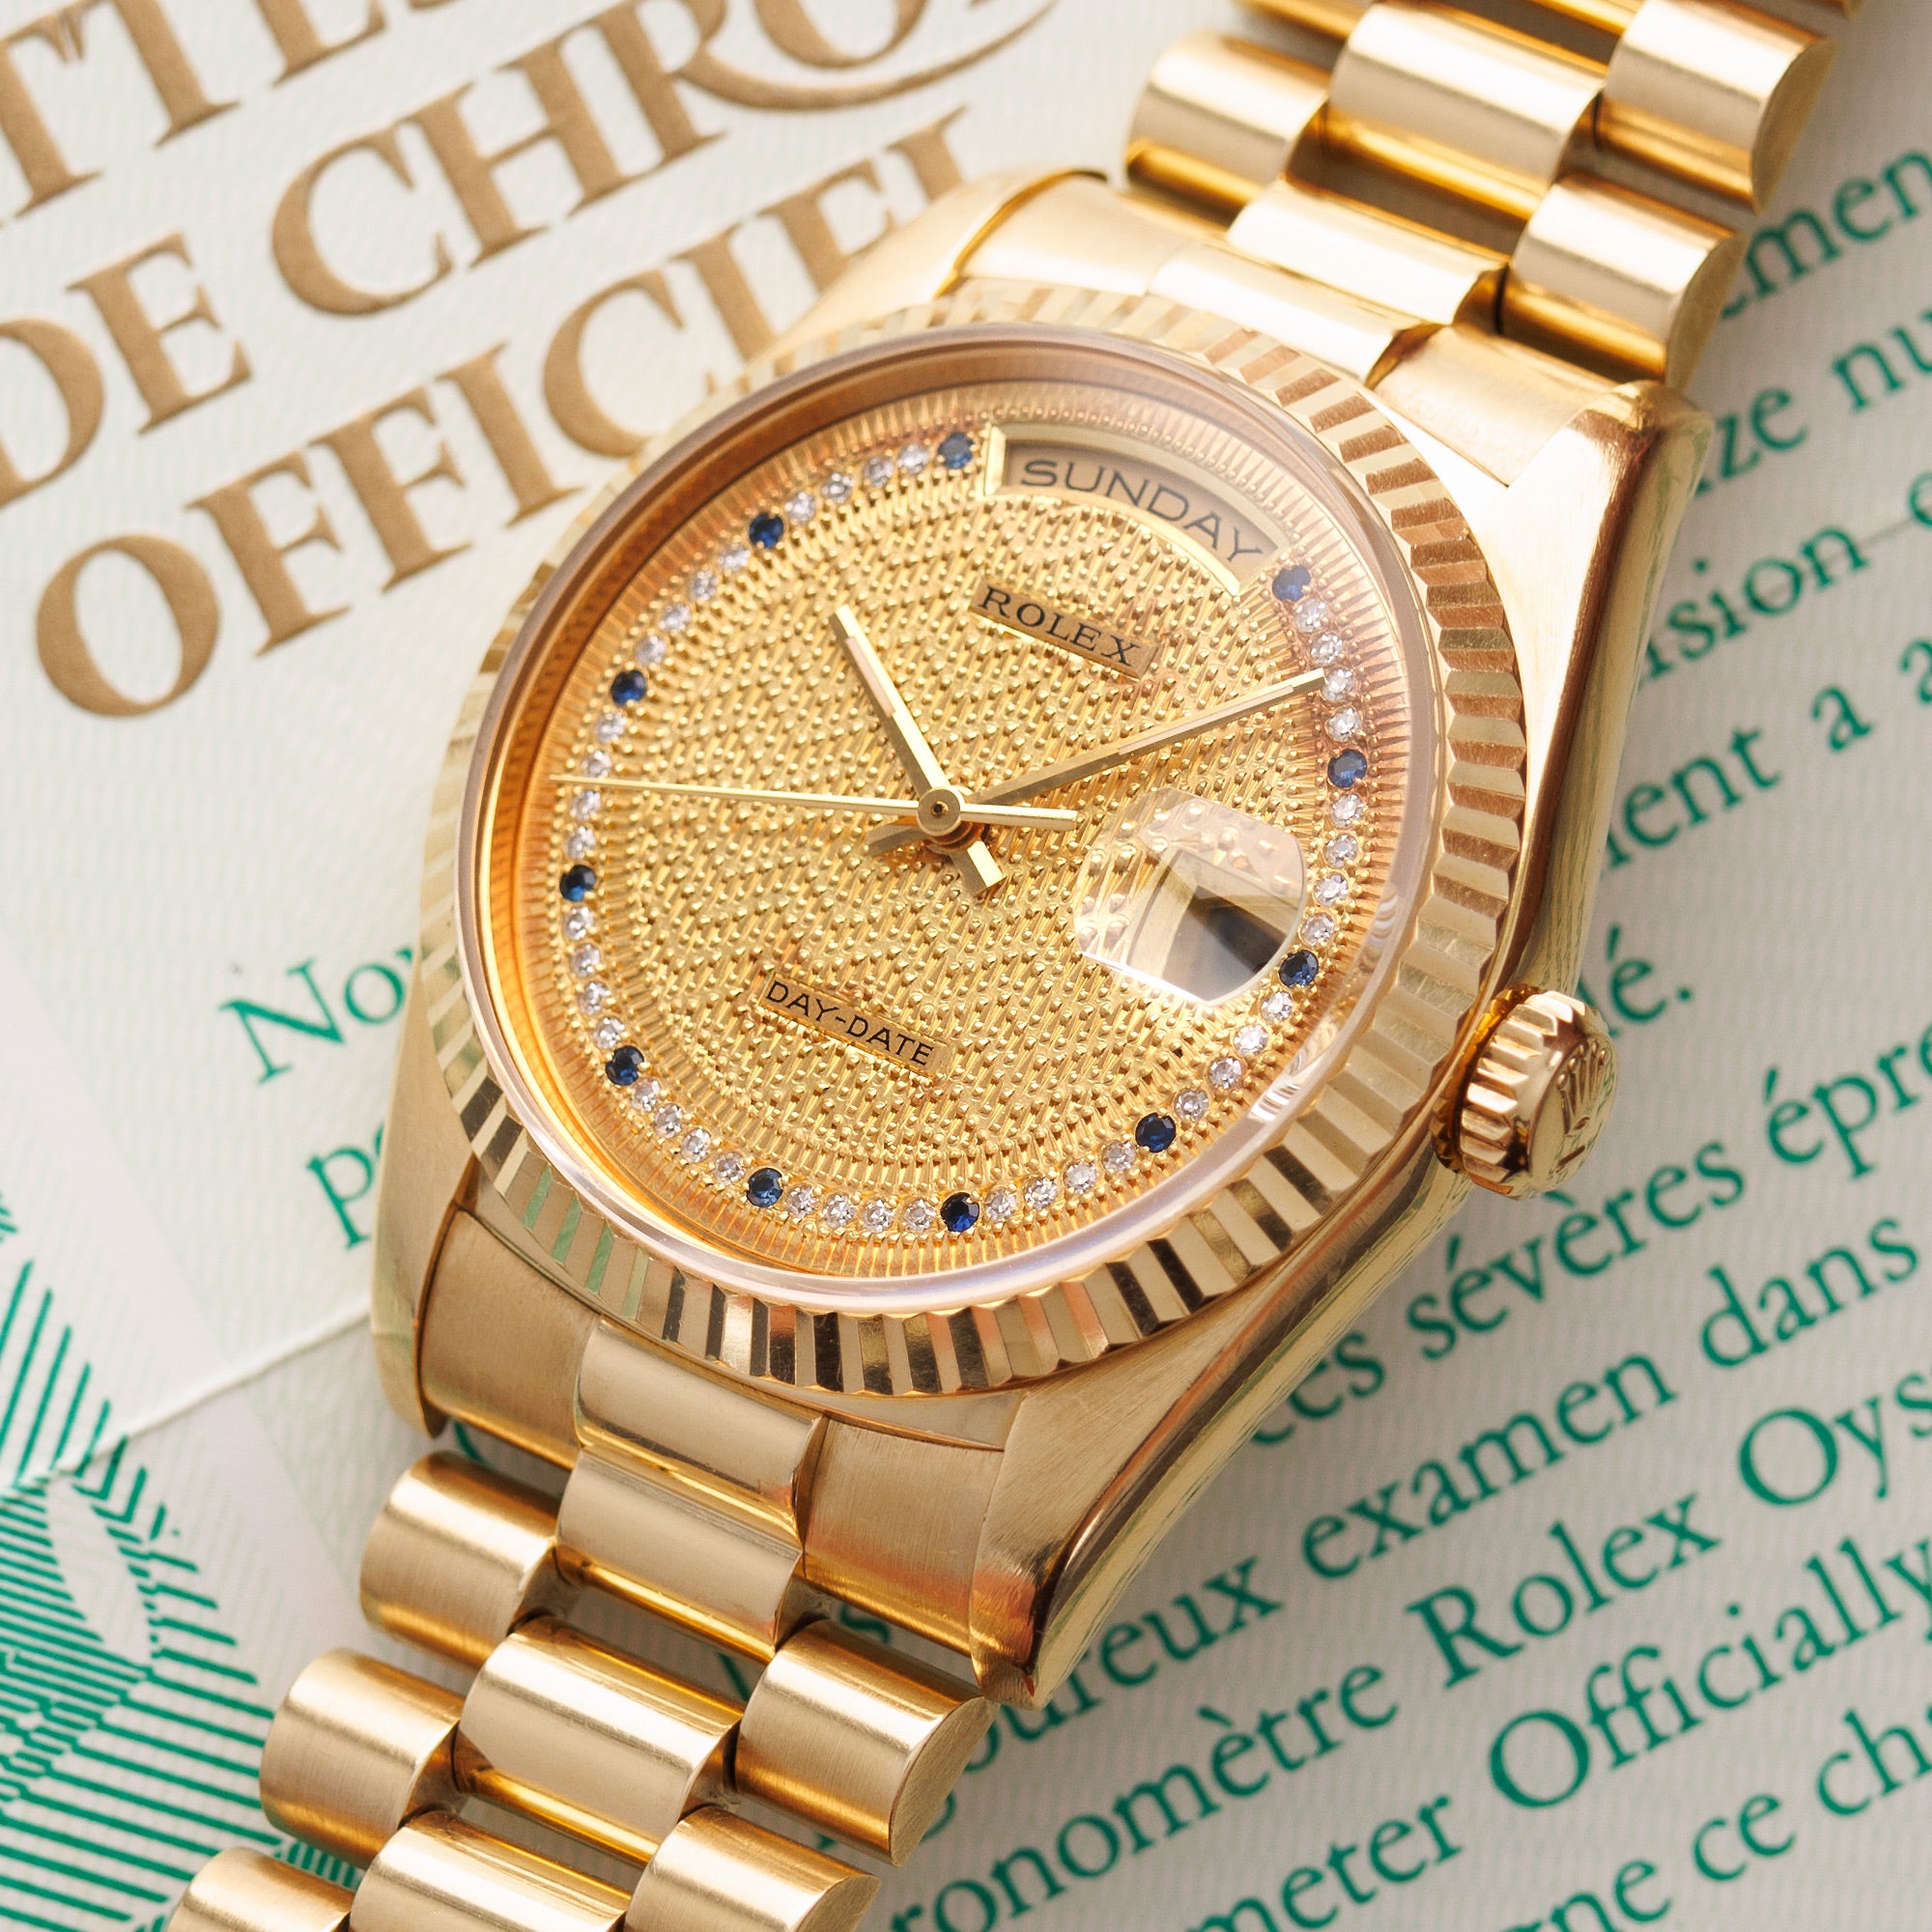 Rolex - Rolex Day-Date Ref. 18238 with Gold Missoni Dial - The Keystone Watches